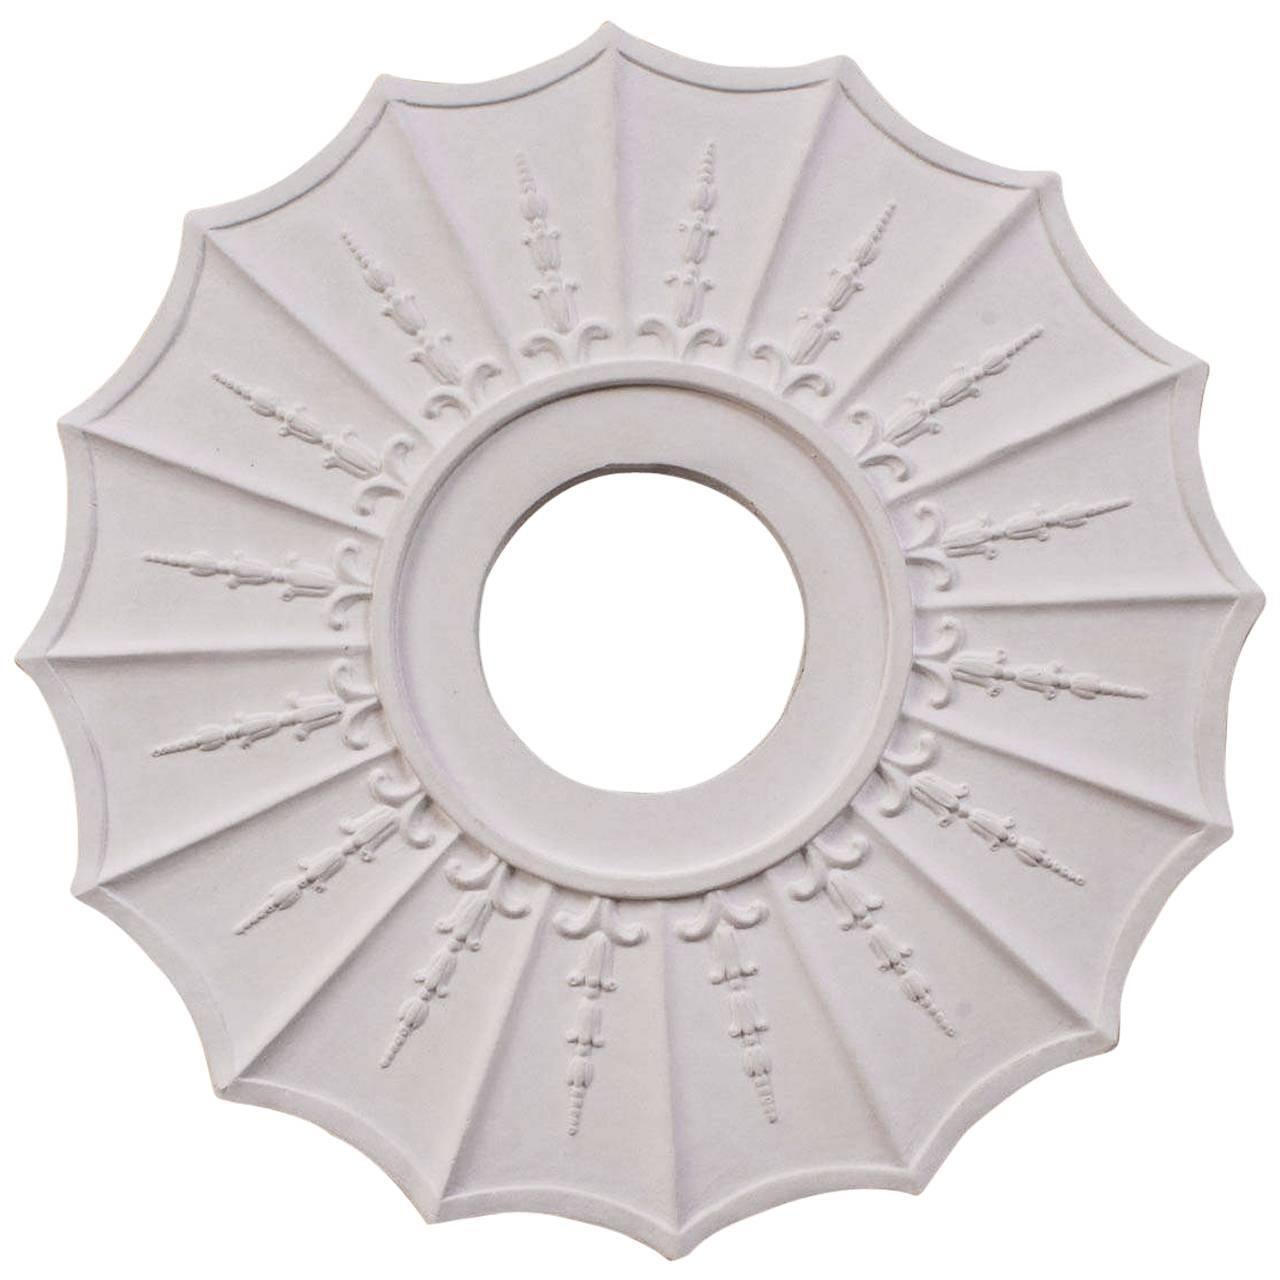 "Chateau" Plaster Ceiling Medallions For Sale